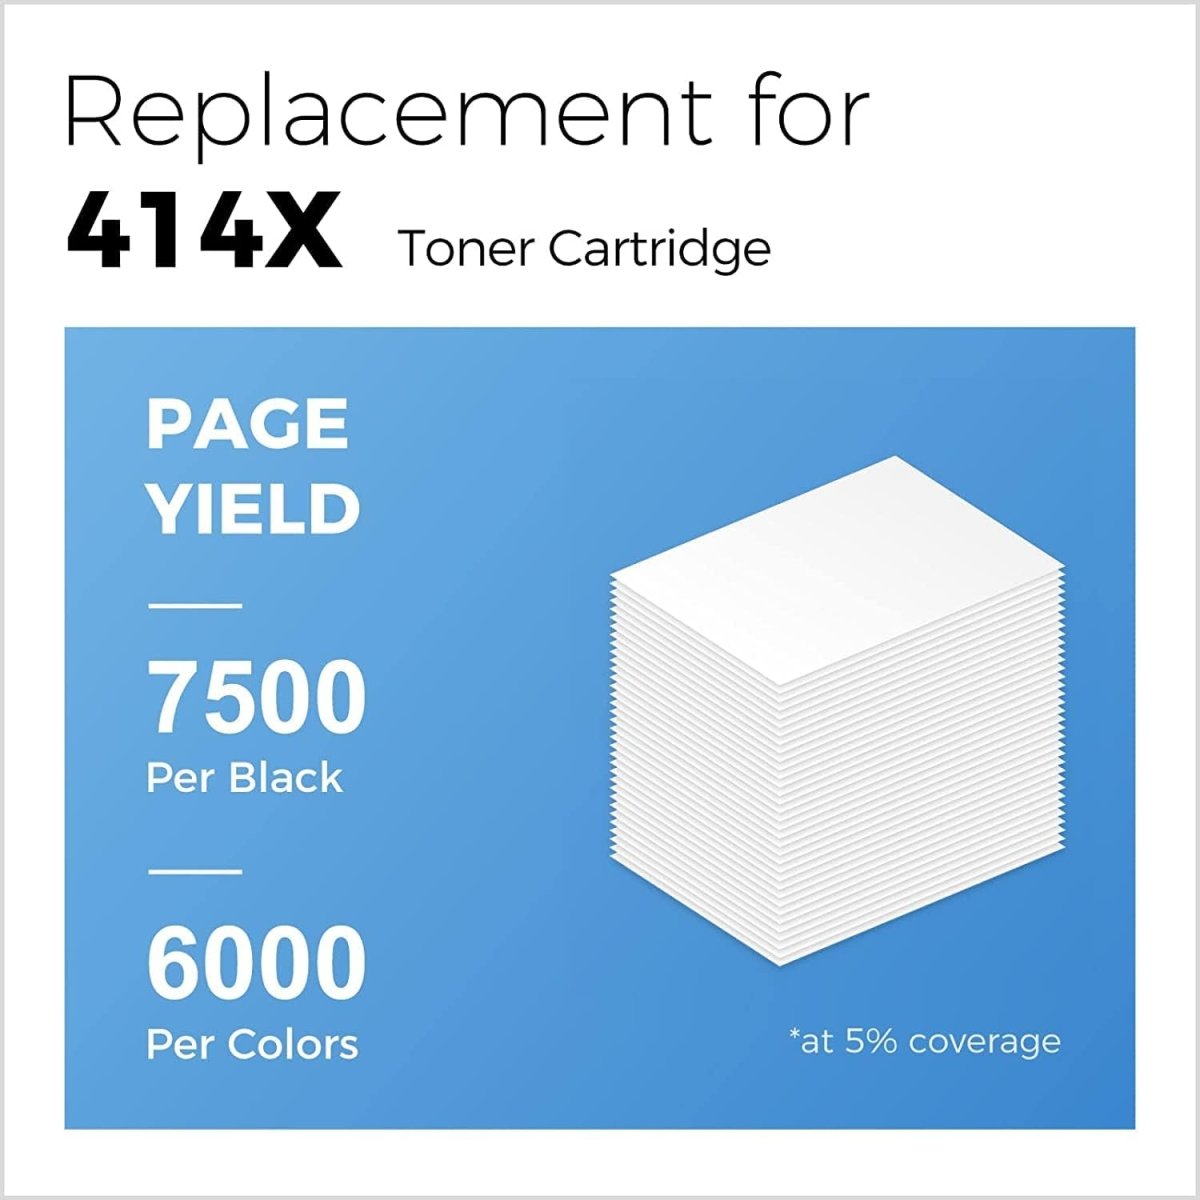 Replacement HP 414X Toner Cartridge (with chip) W2020X Black - Linford Office:Printer Ink & Toner Cartridge